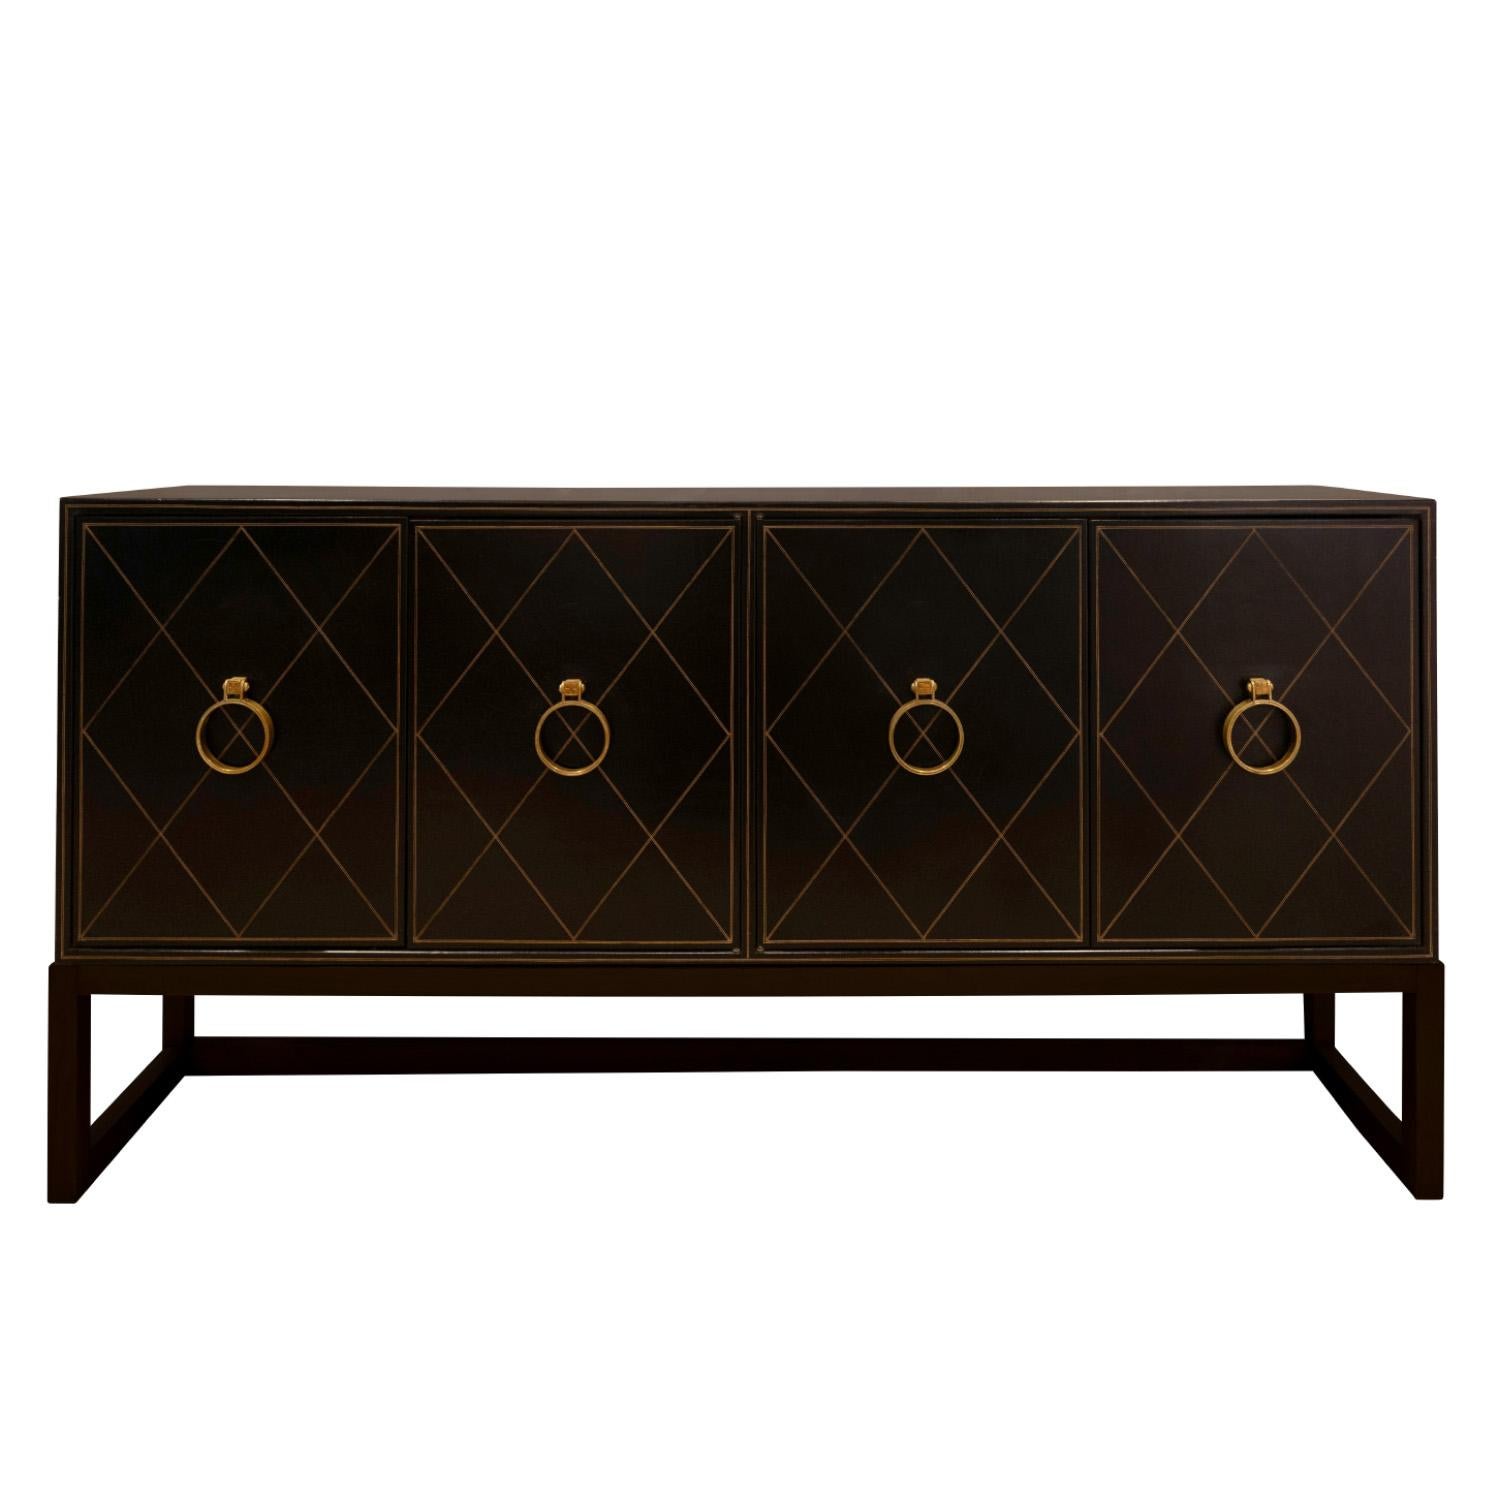 Iconic and rare 4 door credenza model TP 18  with hand-tooled black leather doors and iconic etched brass pulls on ebonized mahogany base by Tommi Parzinger for Charak Modern, American 1940's (signed on back “Charak Modern”). The hand-tooling is